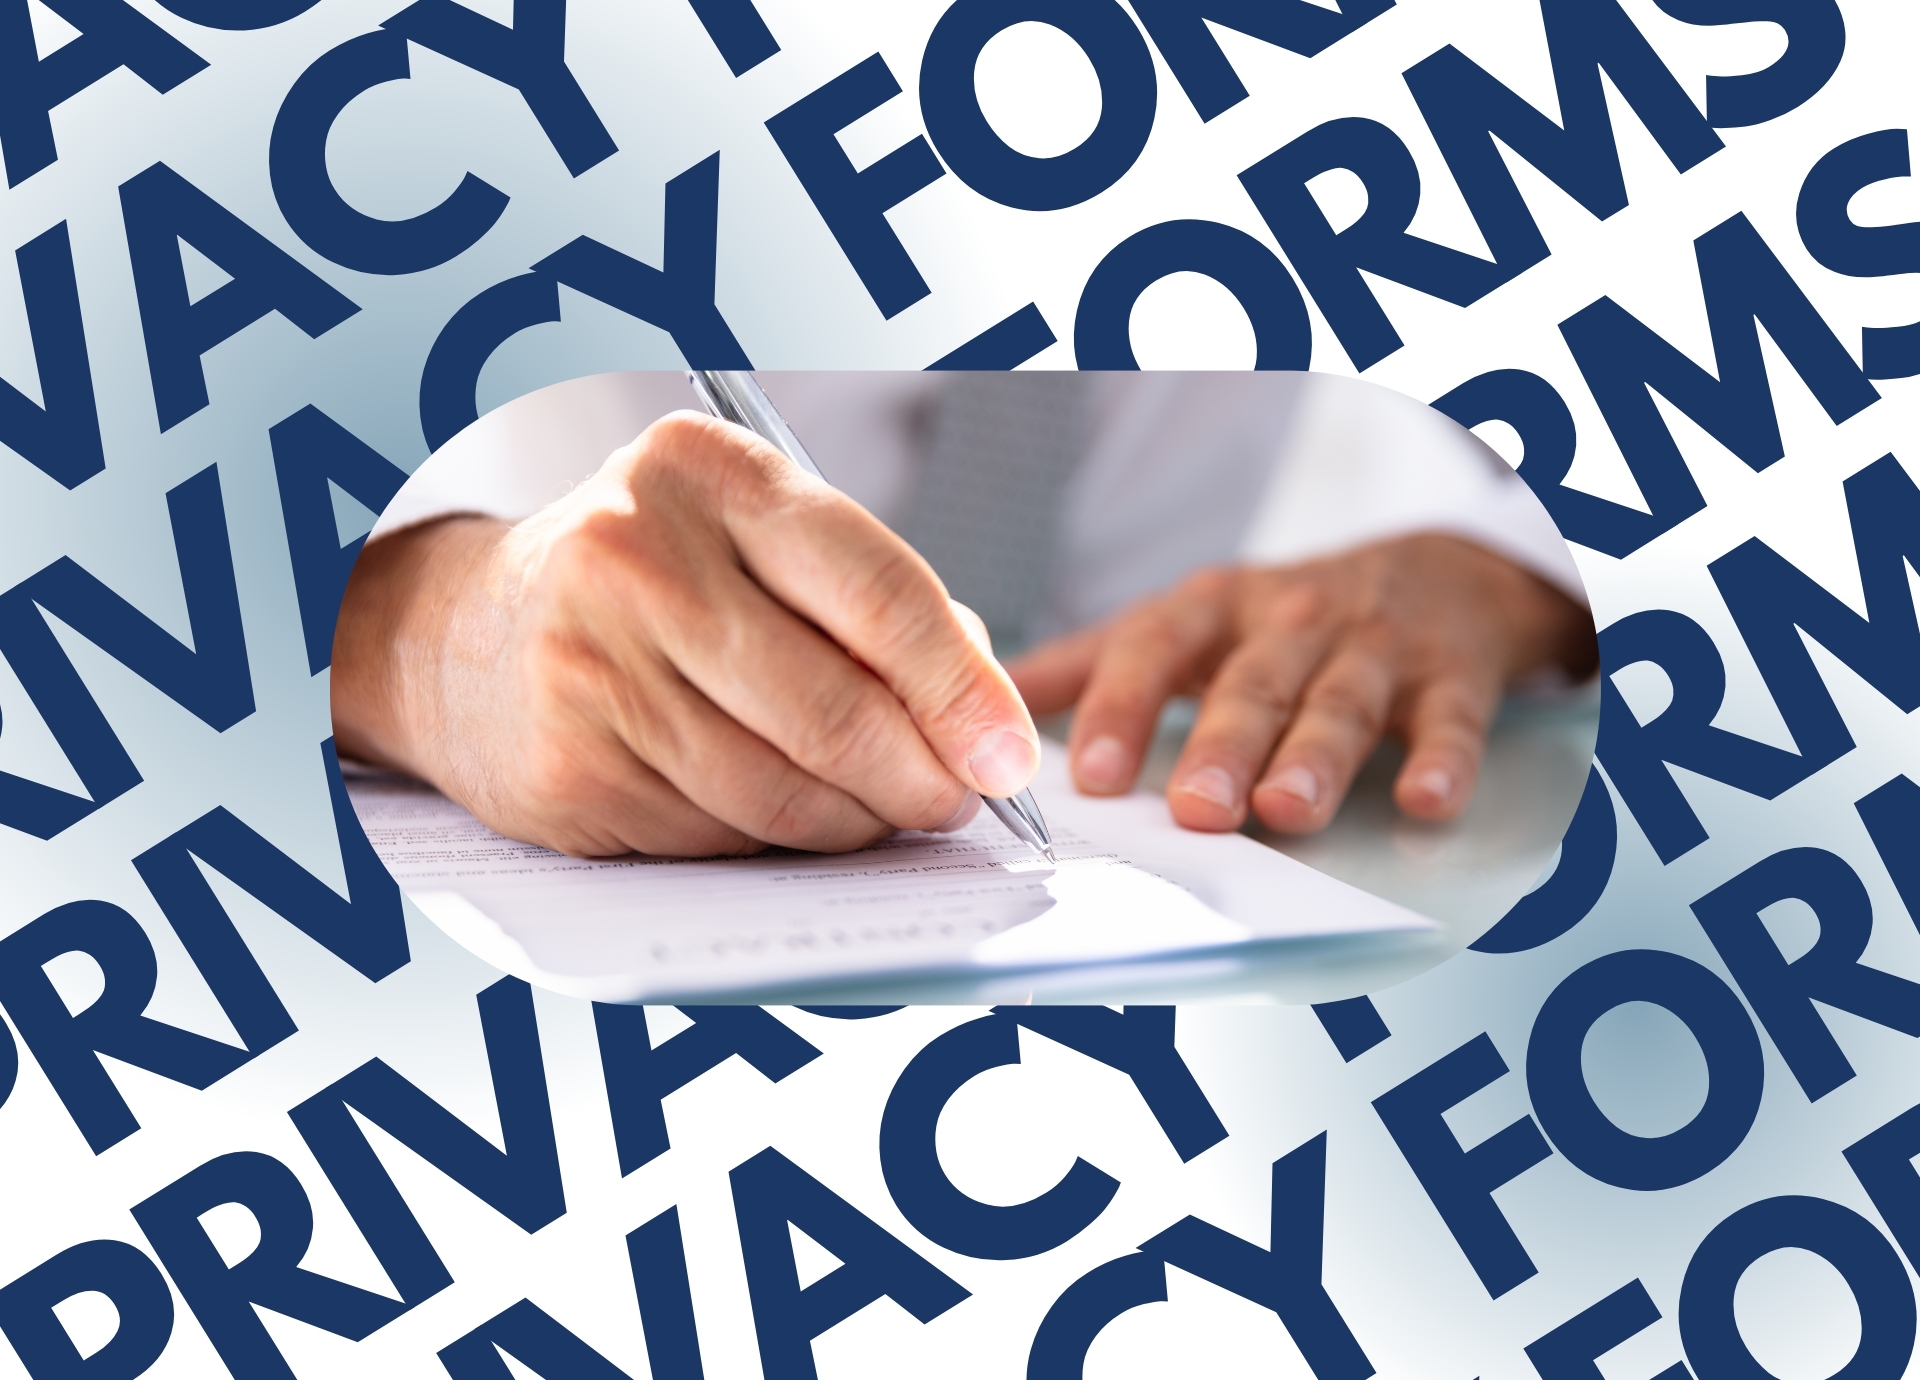 HIPAA privacy forms